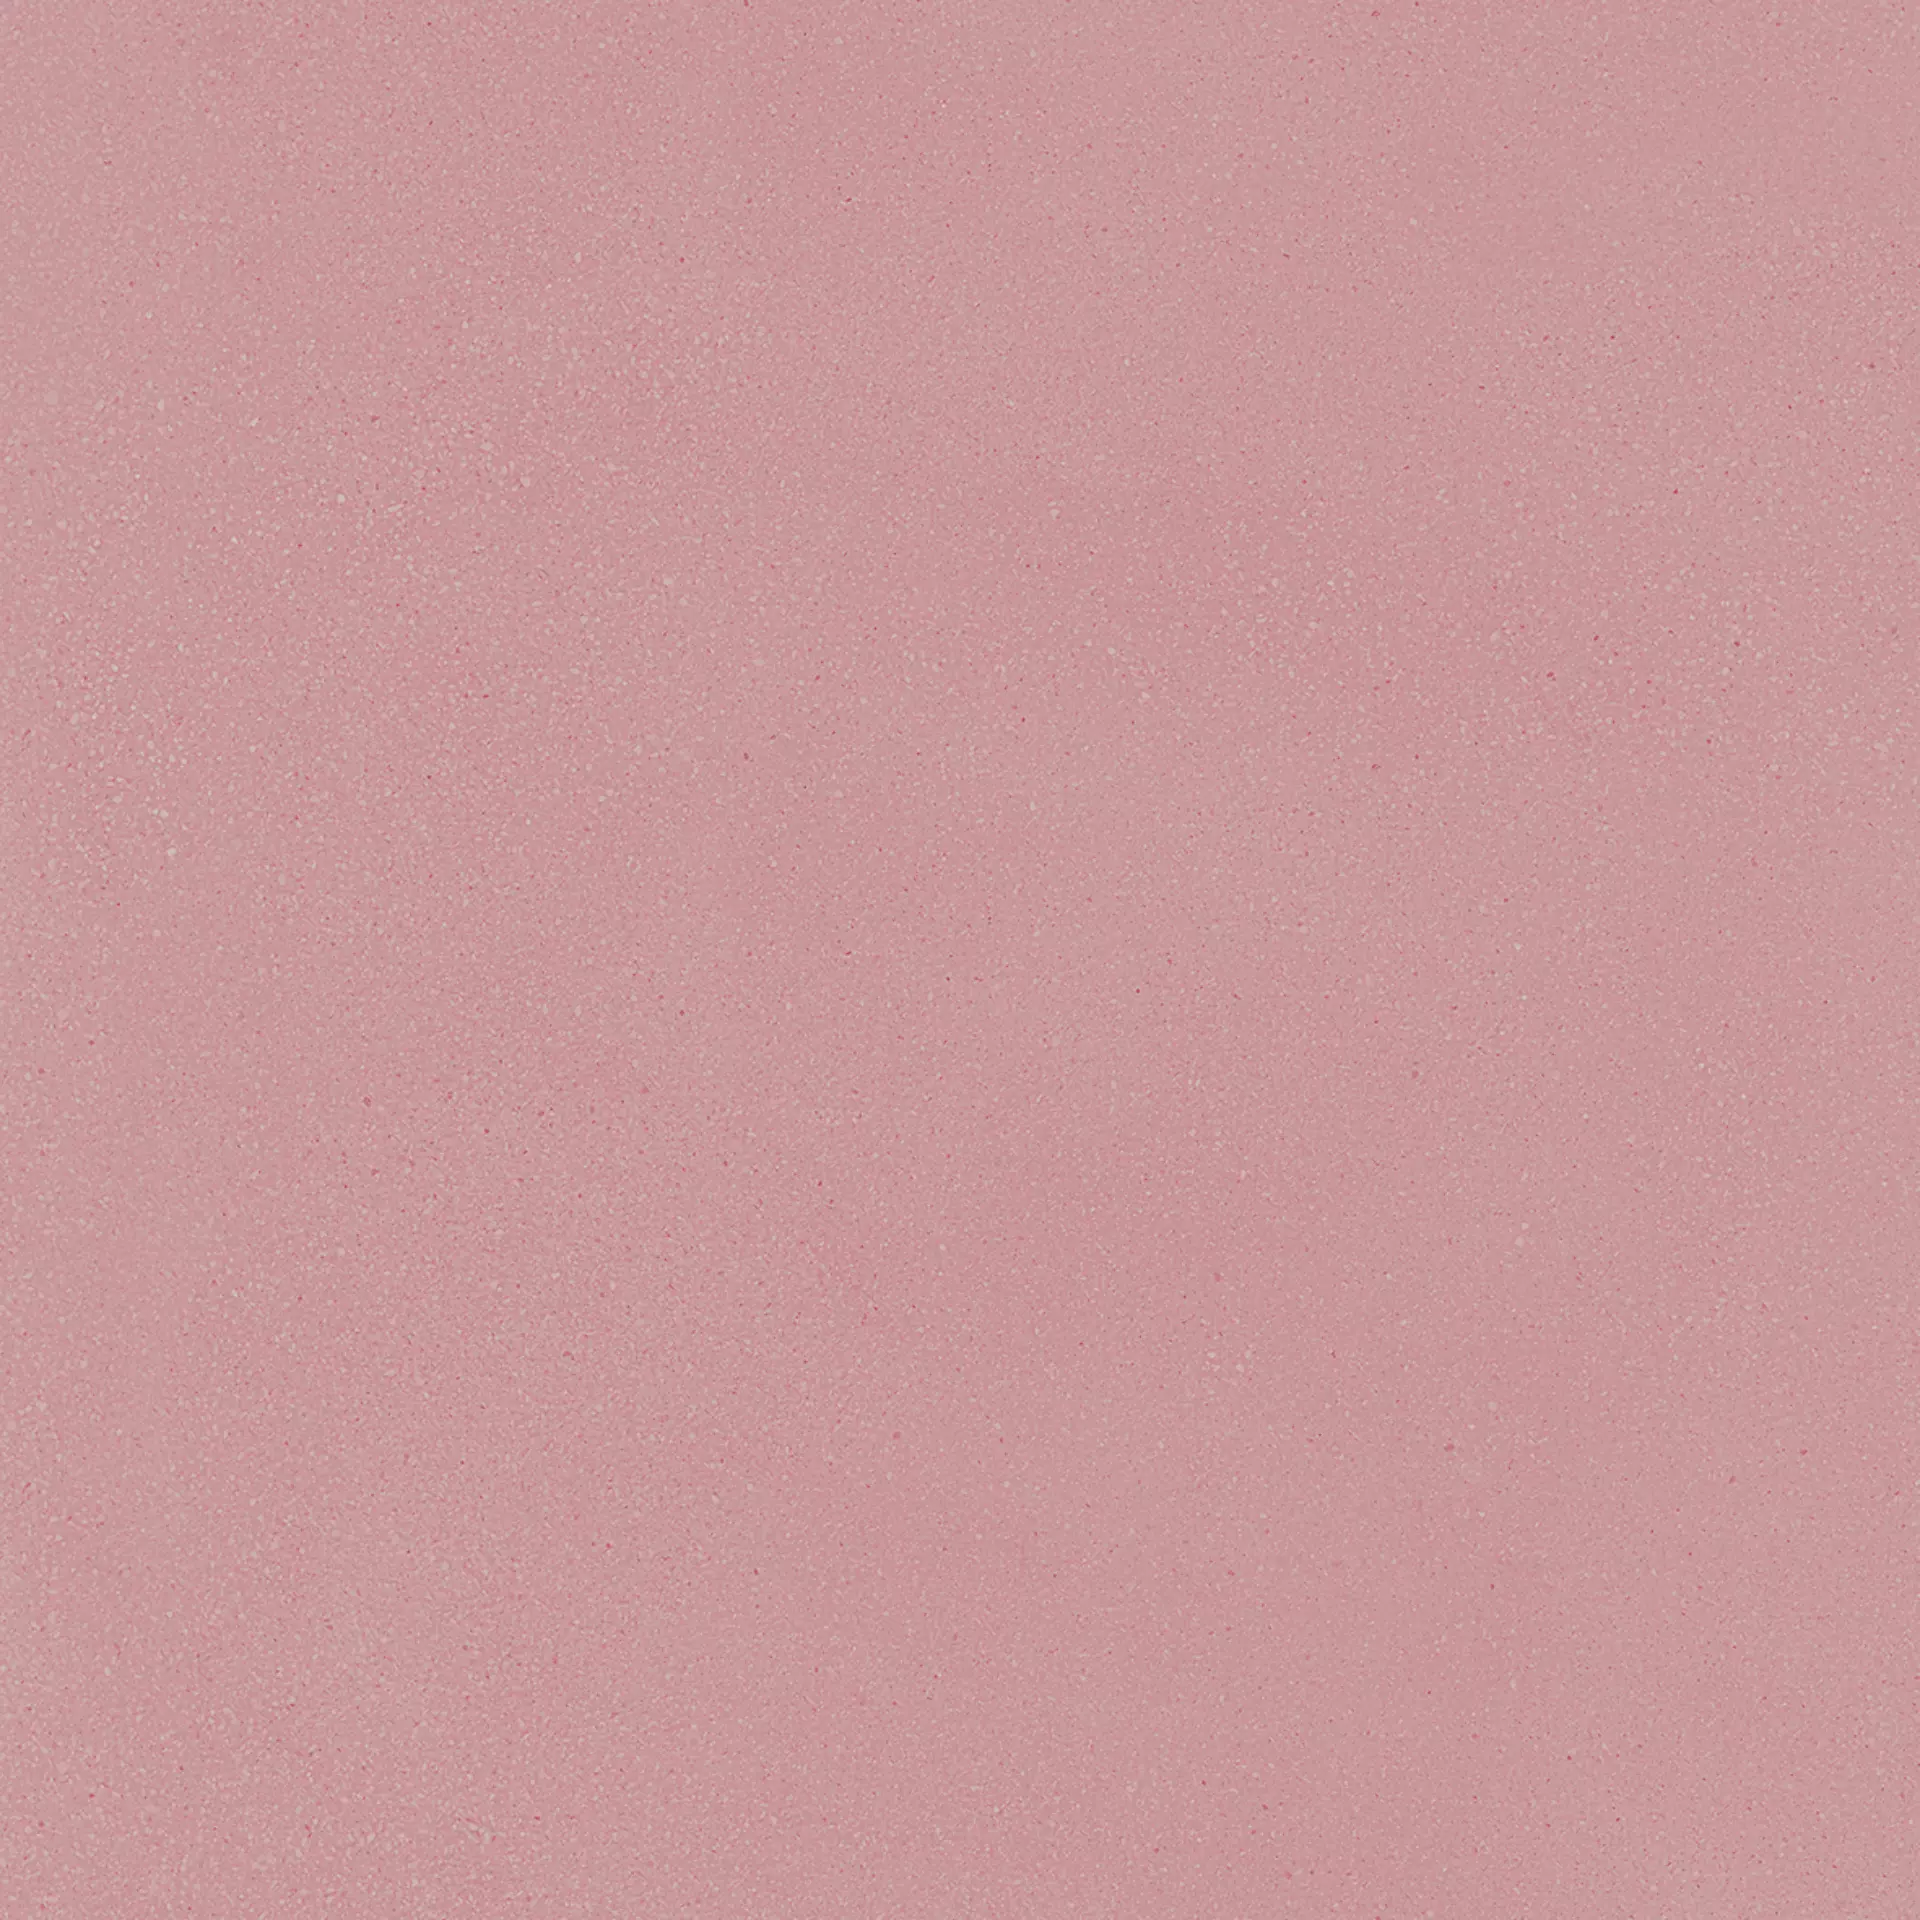 Ergon Medley Minimal Light Pink Naturale EH6Y 60x60cm rectified 9,5mm